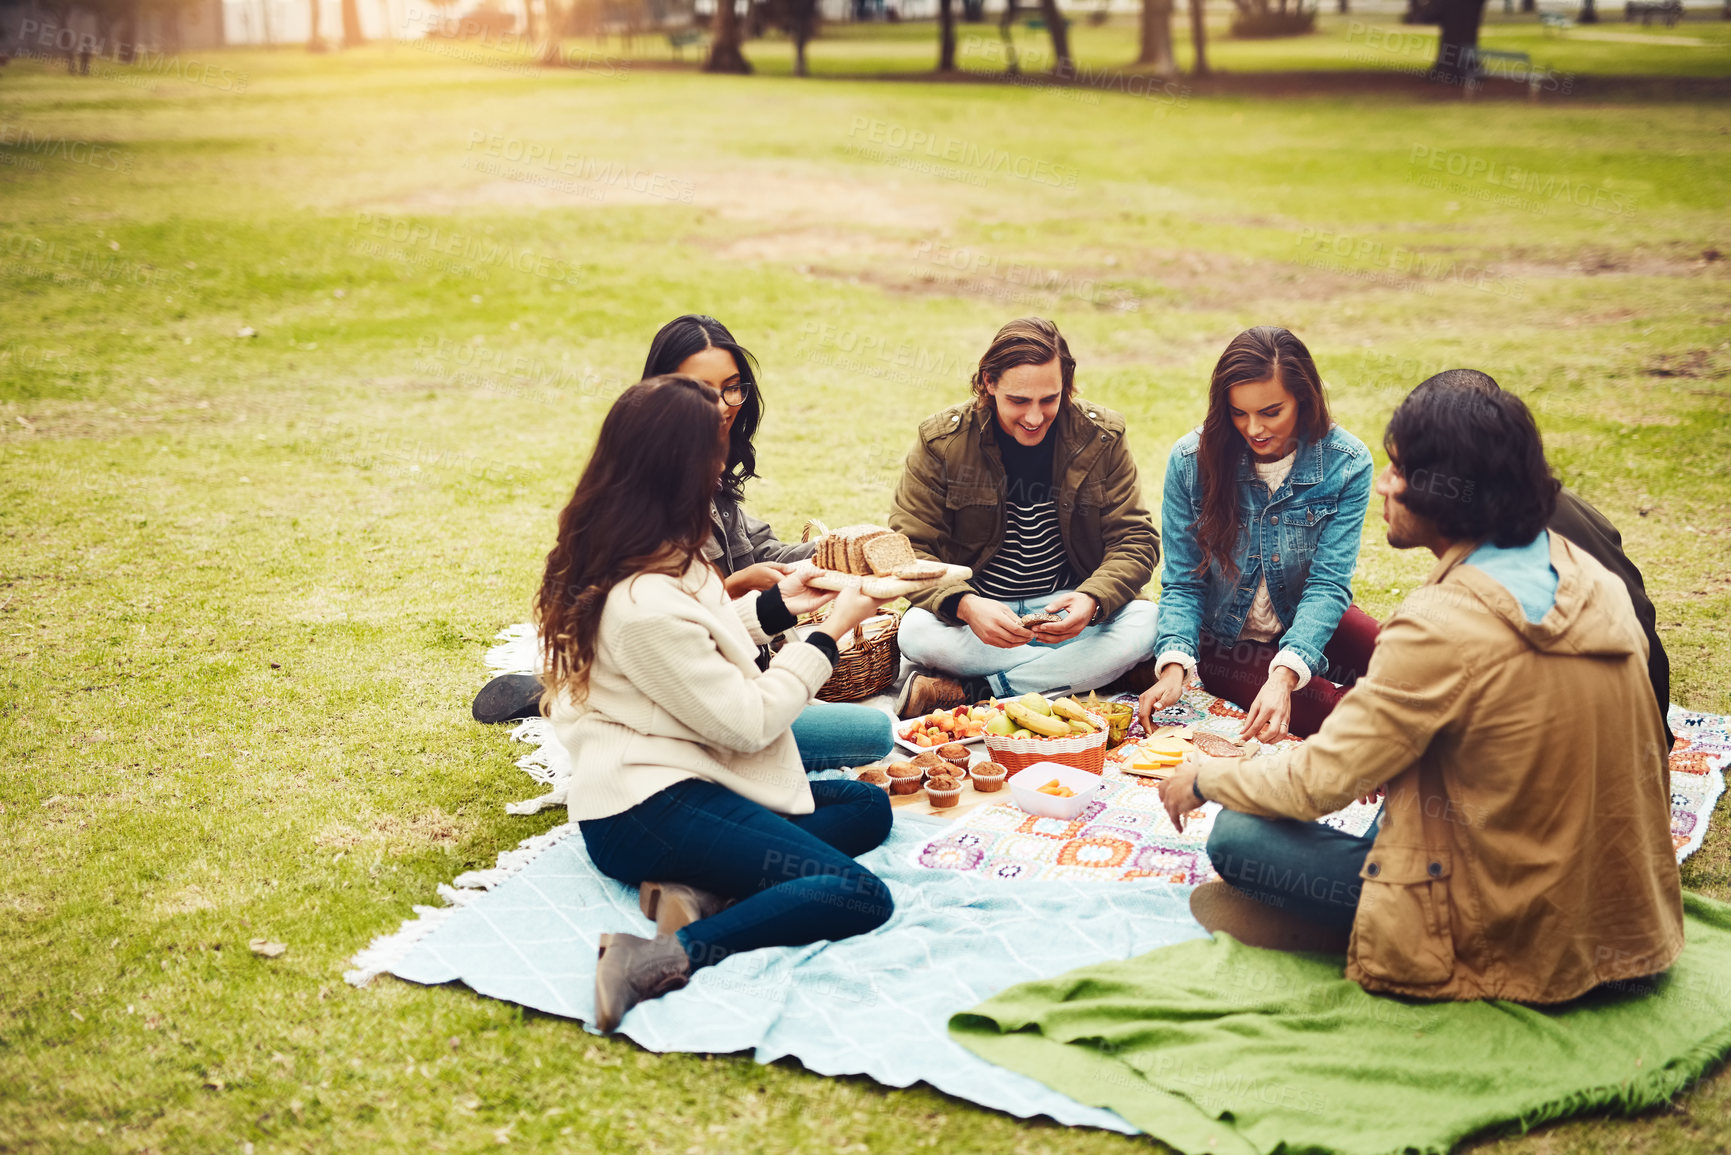 Buy stock photo Shot of a group of cheerful young friends having a picnic together outside in a park during the day